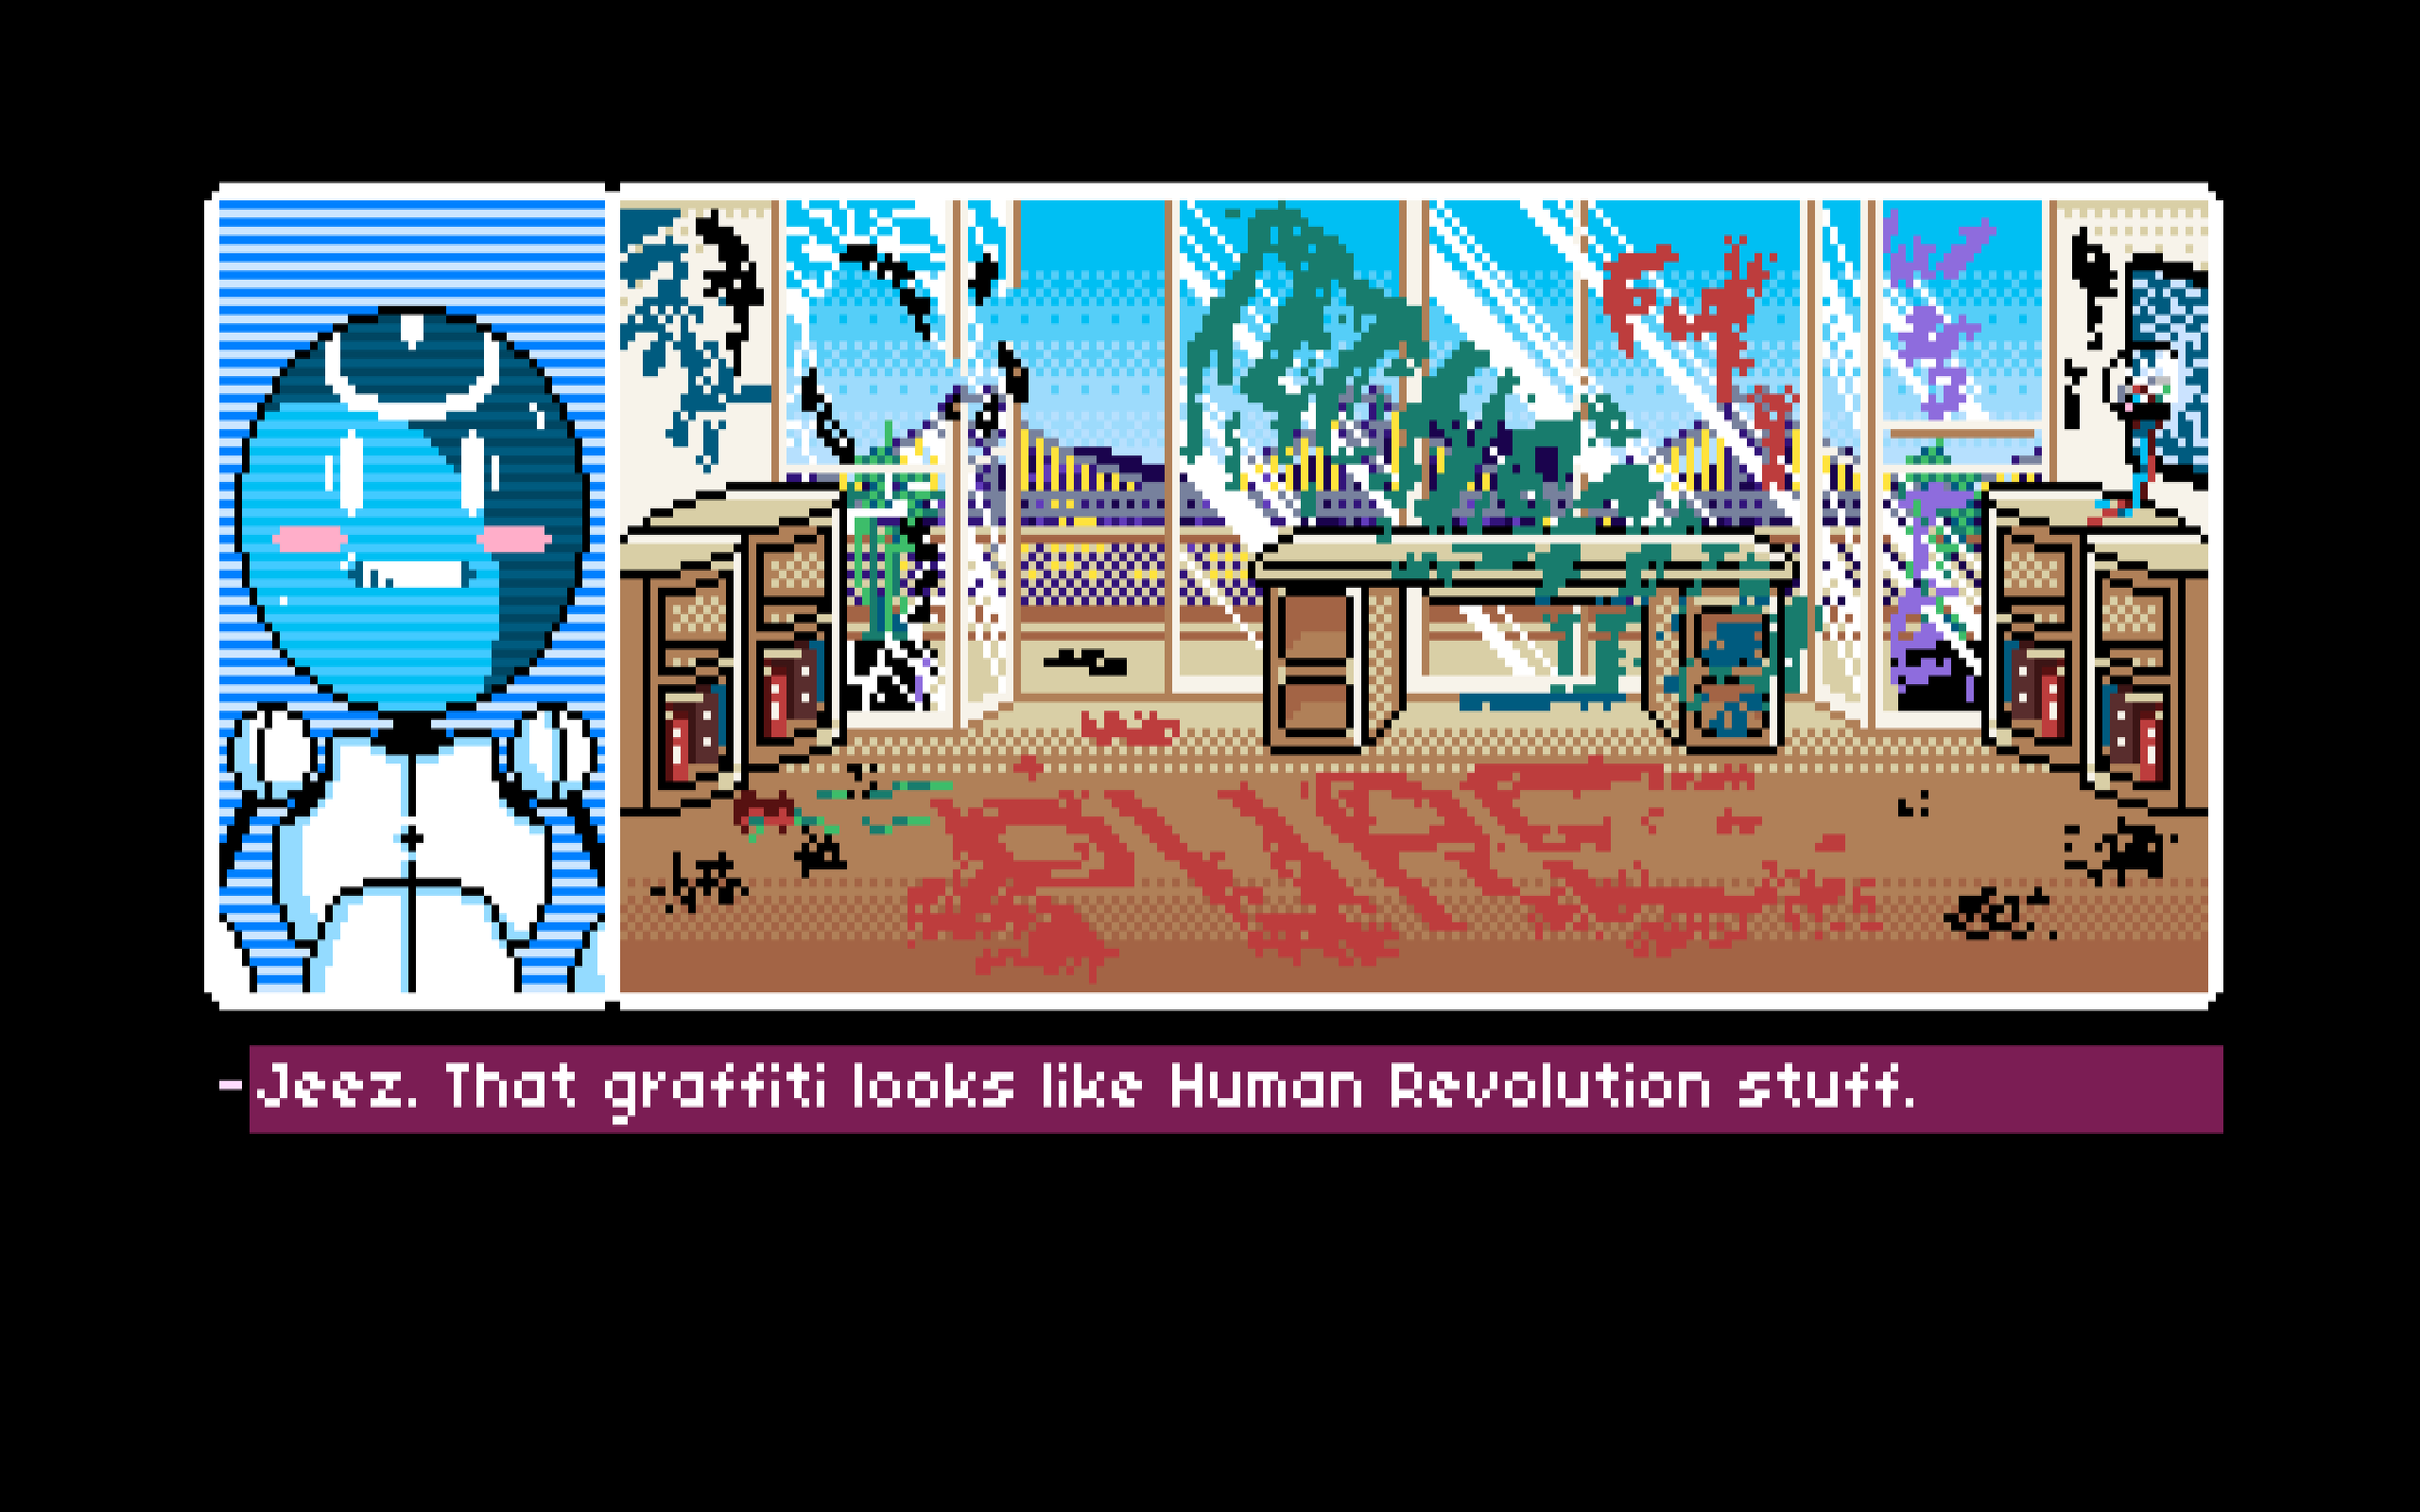 Read Only Memories #5